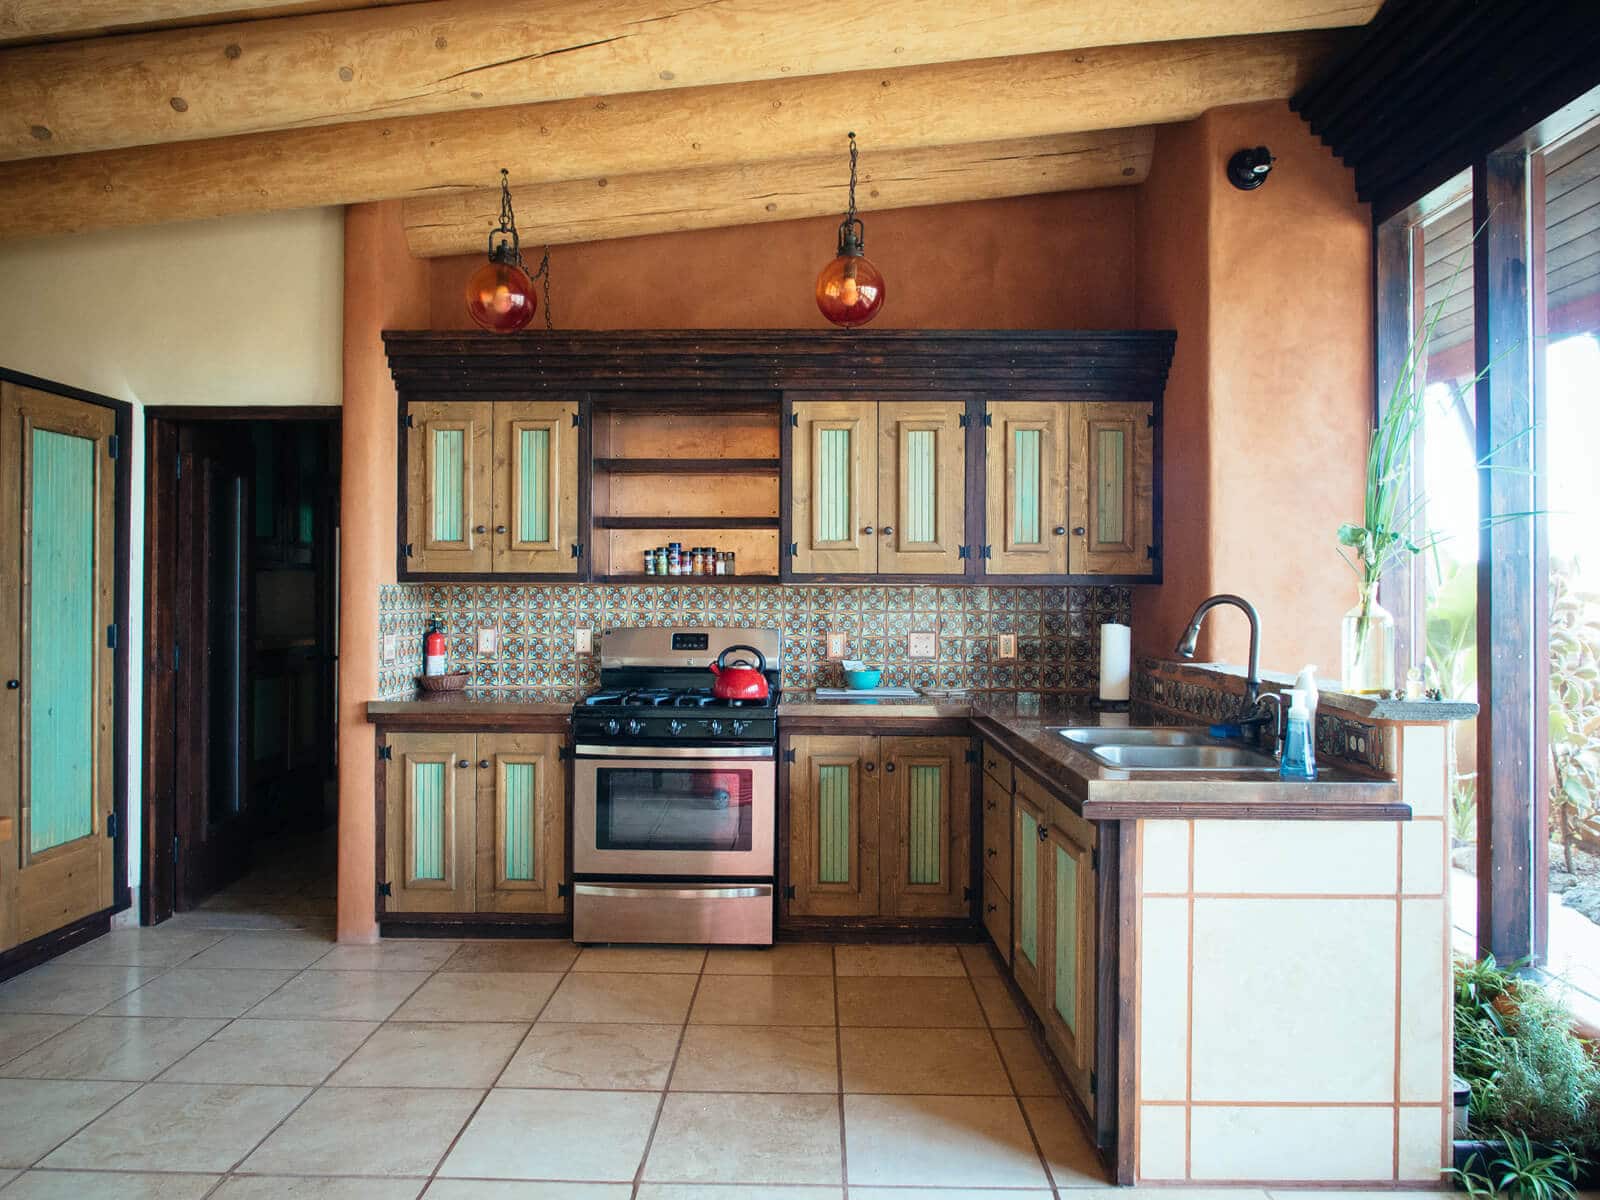 Earthship kitchen with all the amenities including copper countertops